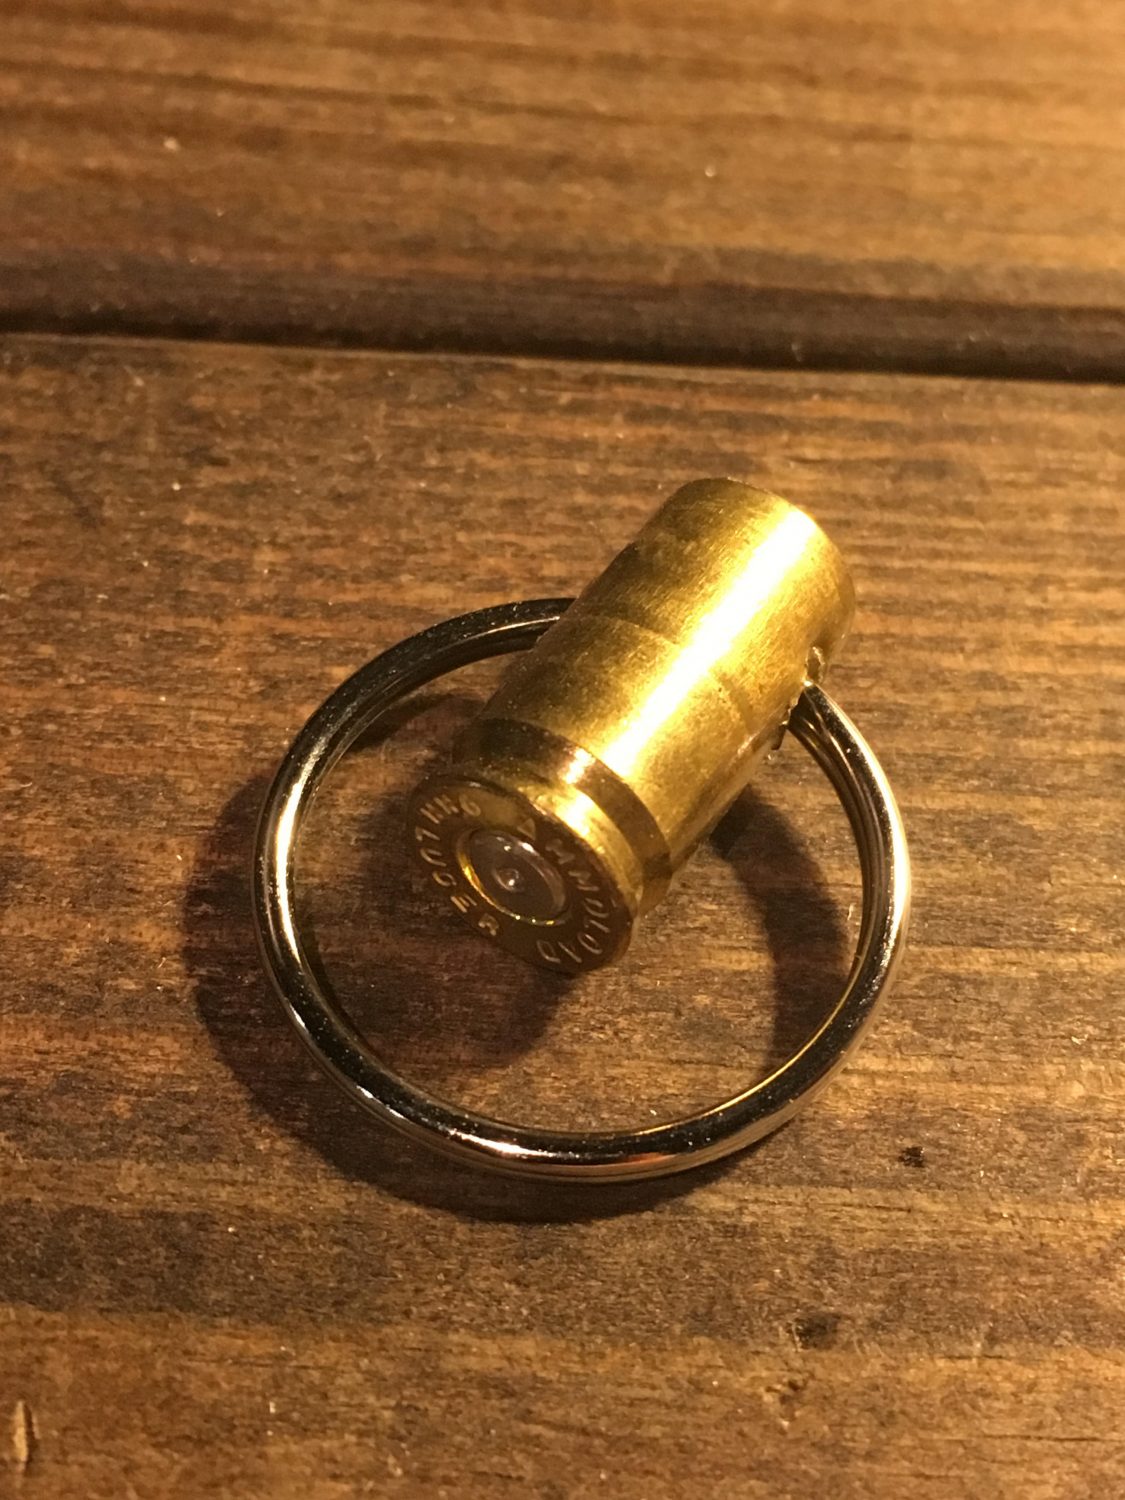 Making bullet shell casing keychains! 